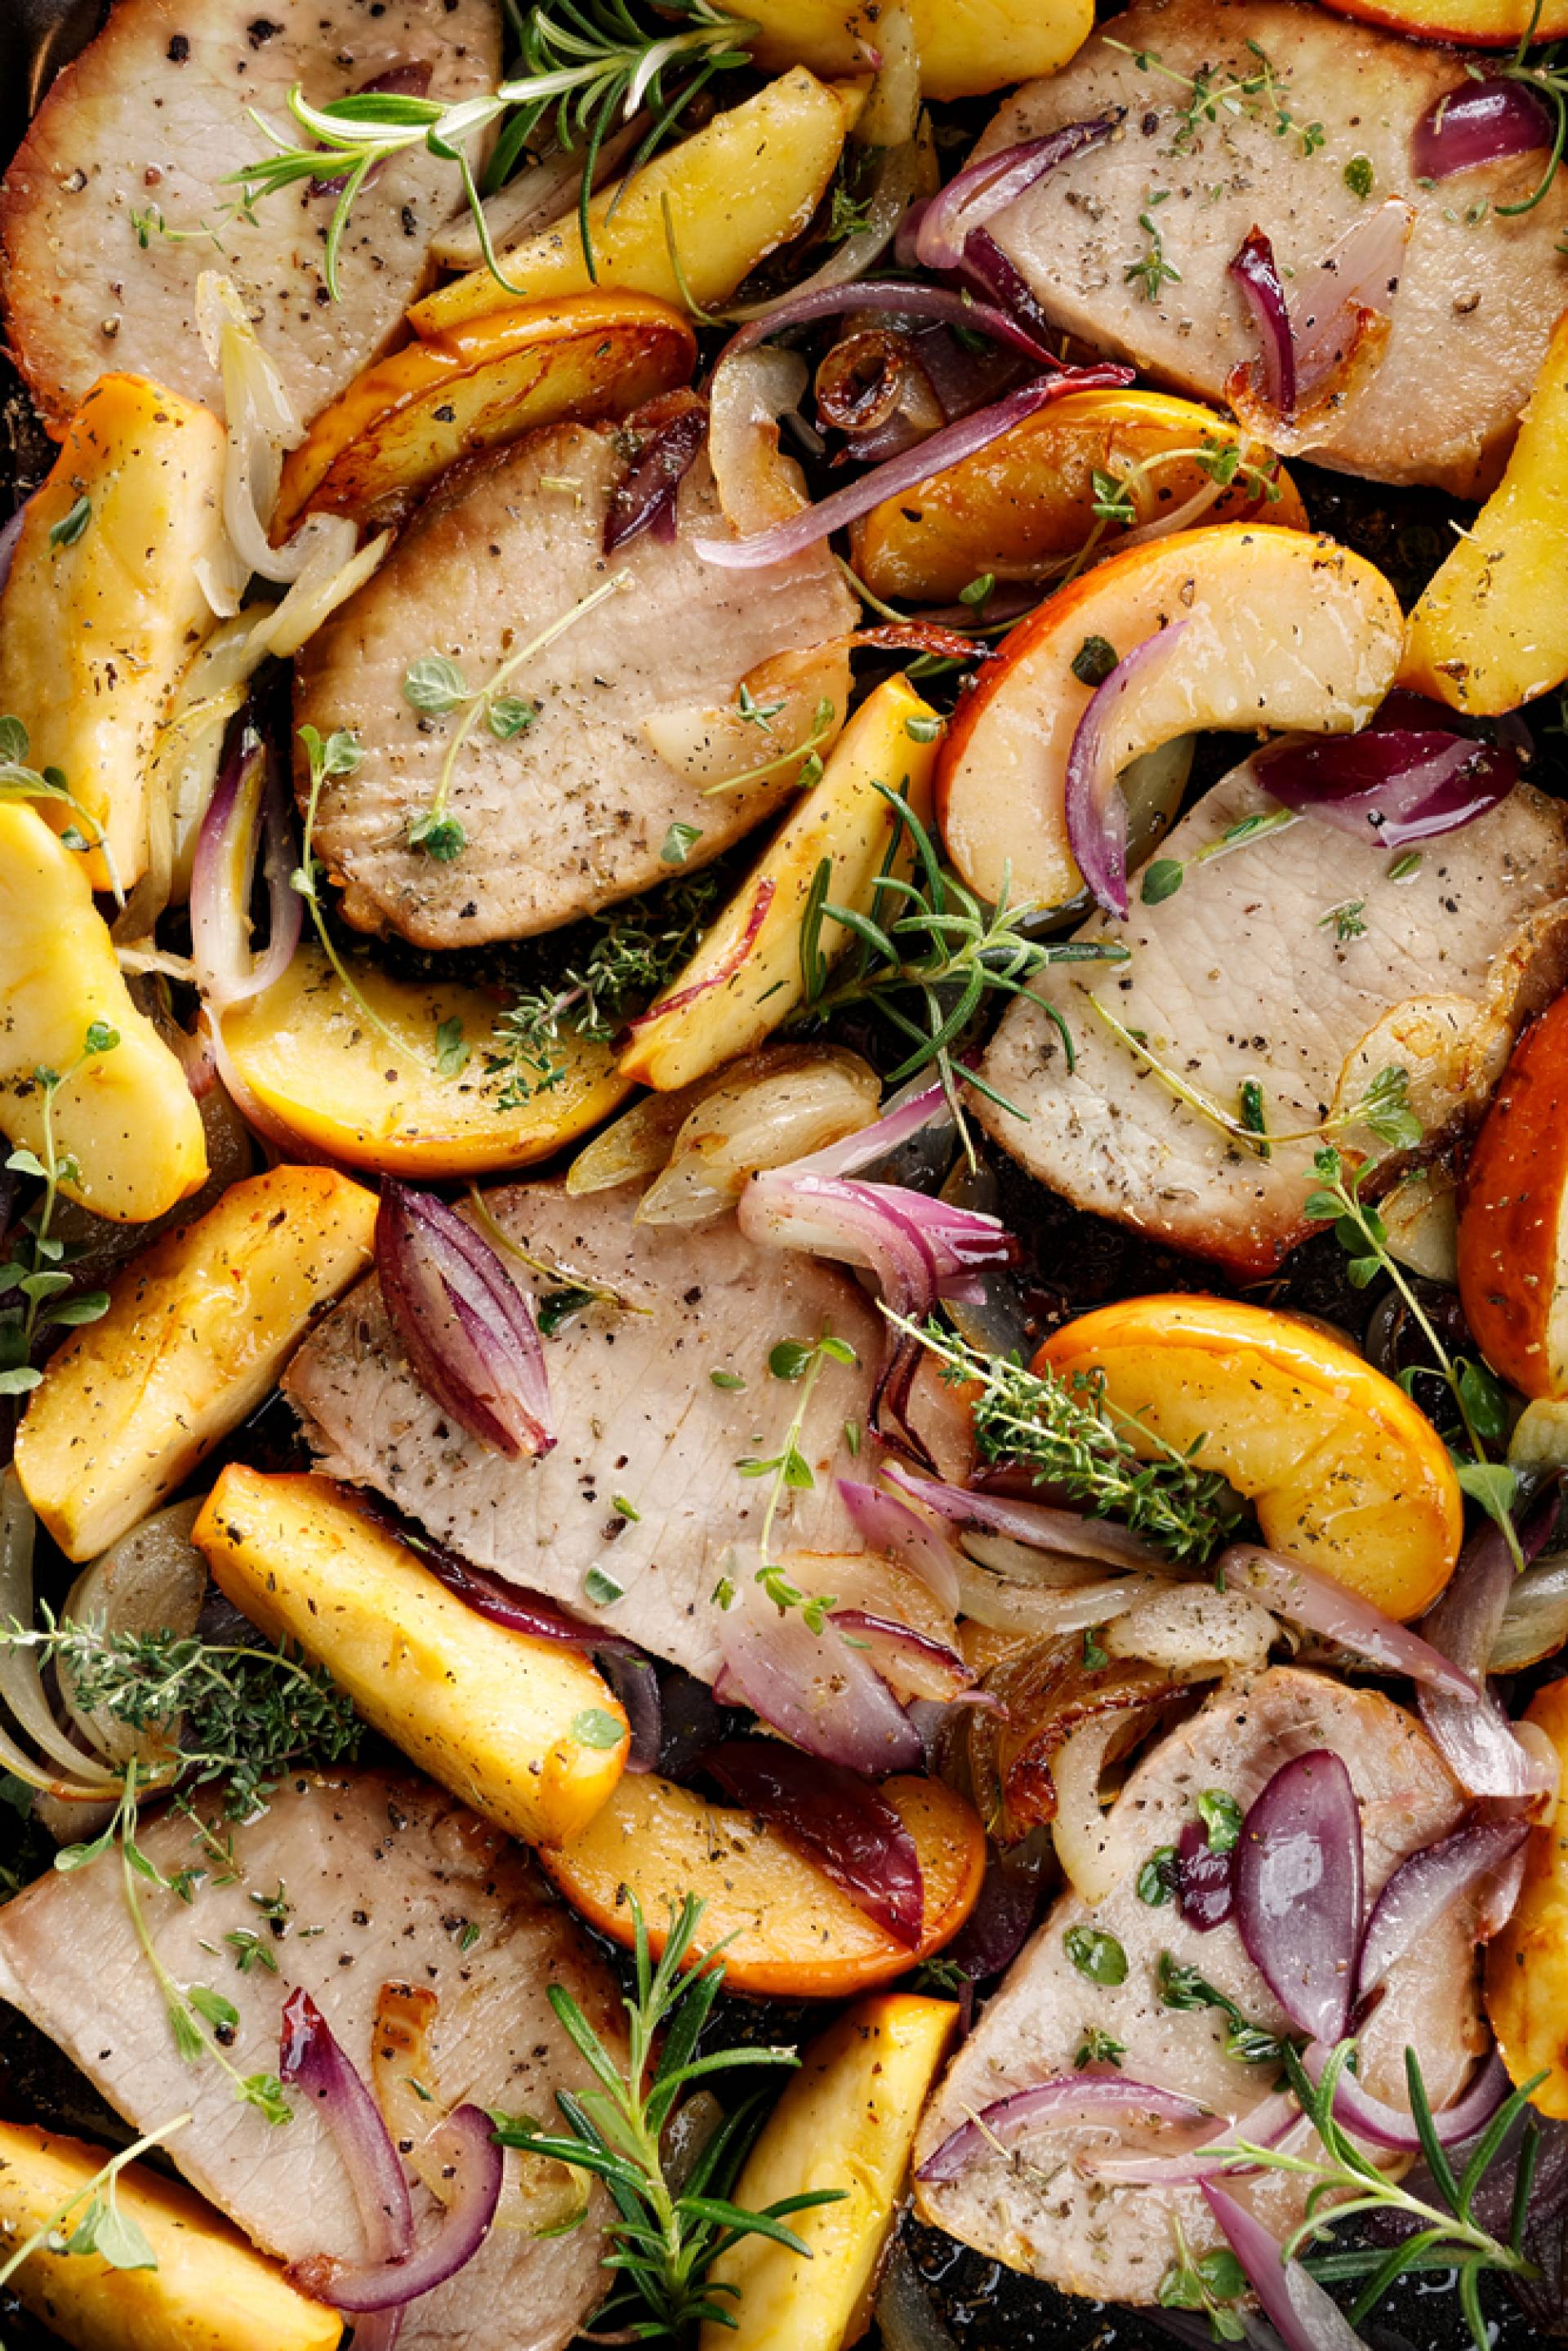 Roasted Pork Tenderloin with Apples and Onions